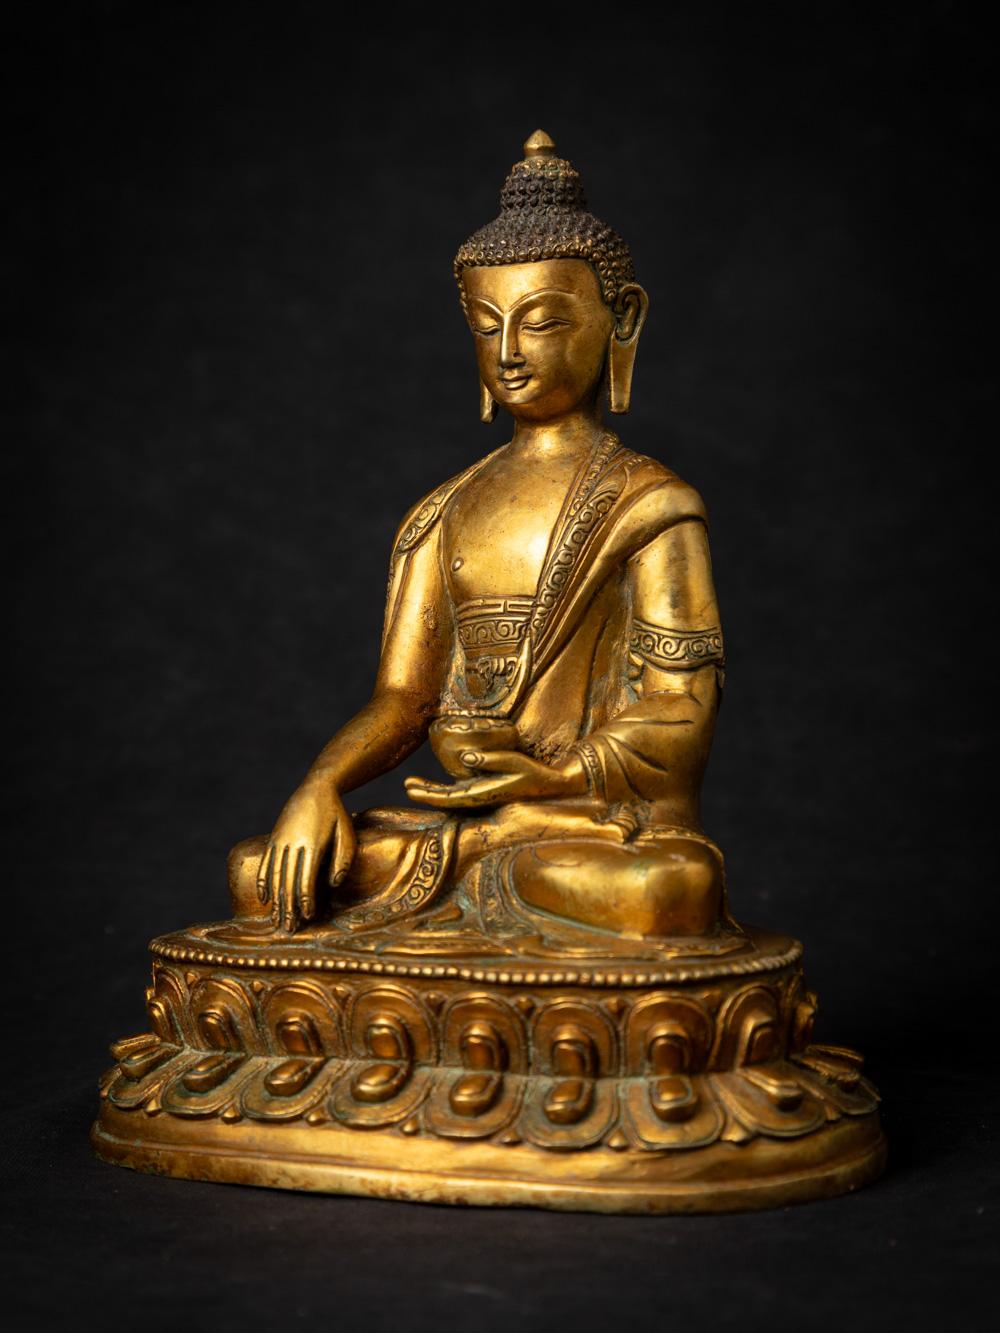 This old bronze Nepali Buddha statue is a captivating and spiritually significant piece of art. Crafted from bronze, it stands at a height of 21.3 cm with dimensions of 17.2 cm in width and 12.4 cm in depth. The statue beautifully depicts the Buddha